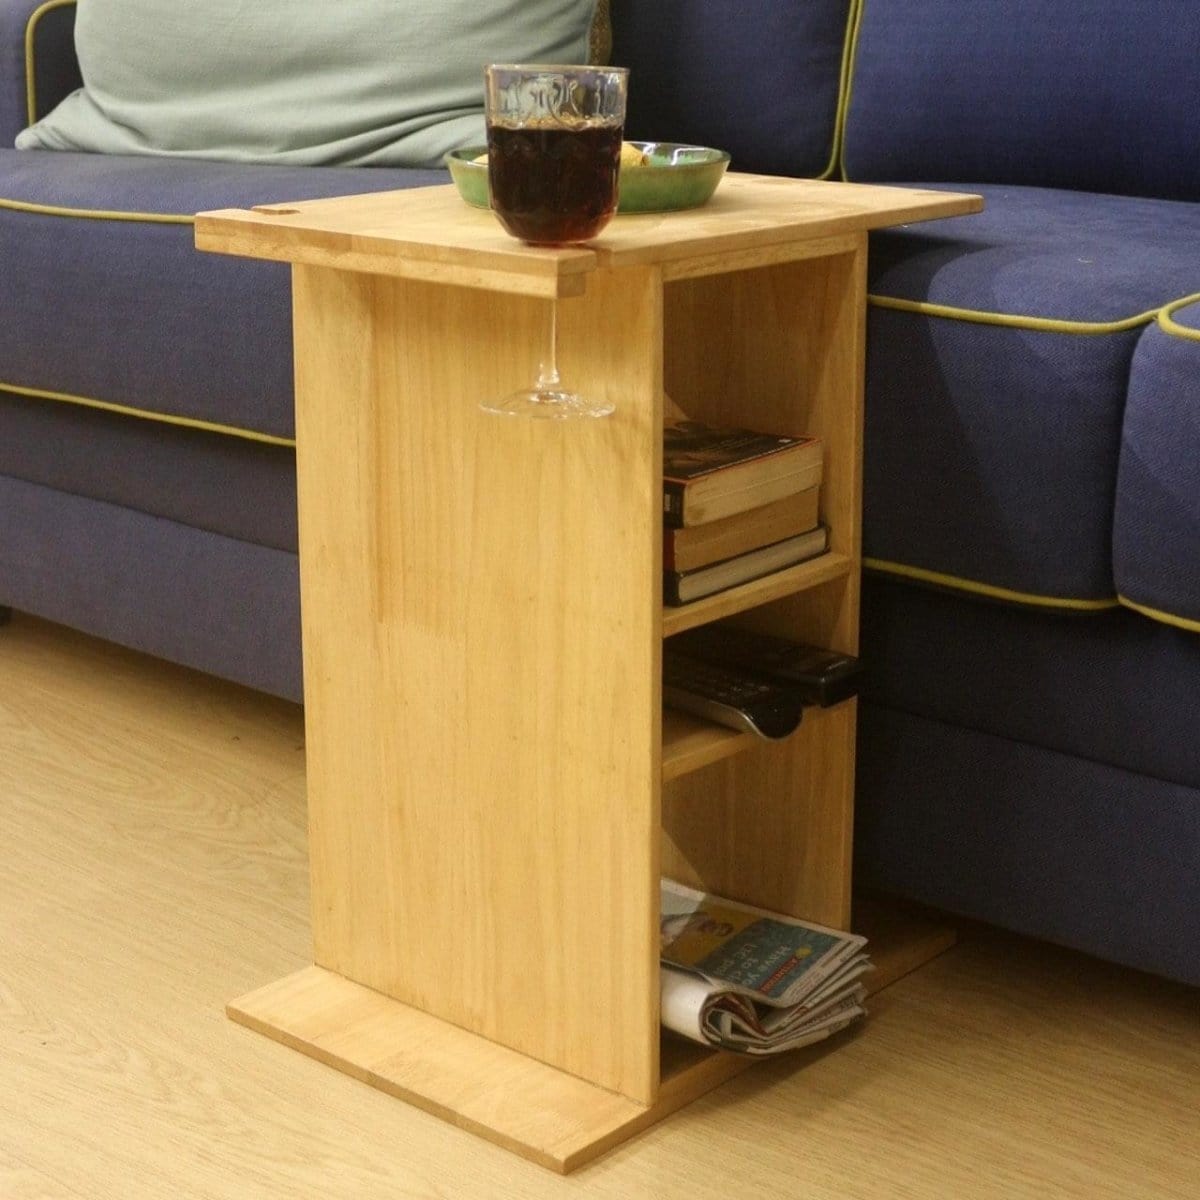 Barish Sofa Table Centre Stand (With Space for your Wine Glass) Rubberwood BH0003RW Best Home Decor Handcrafted